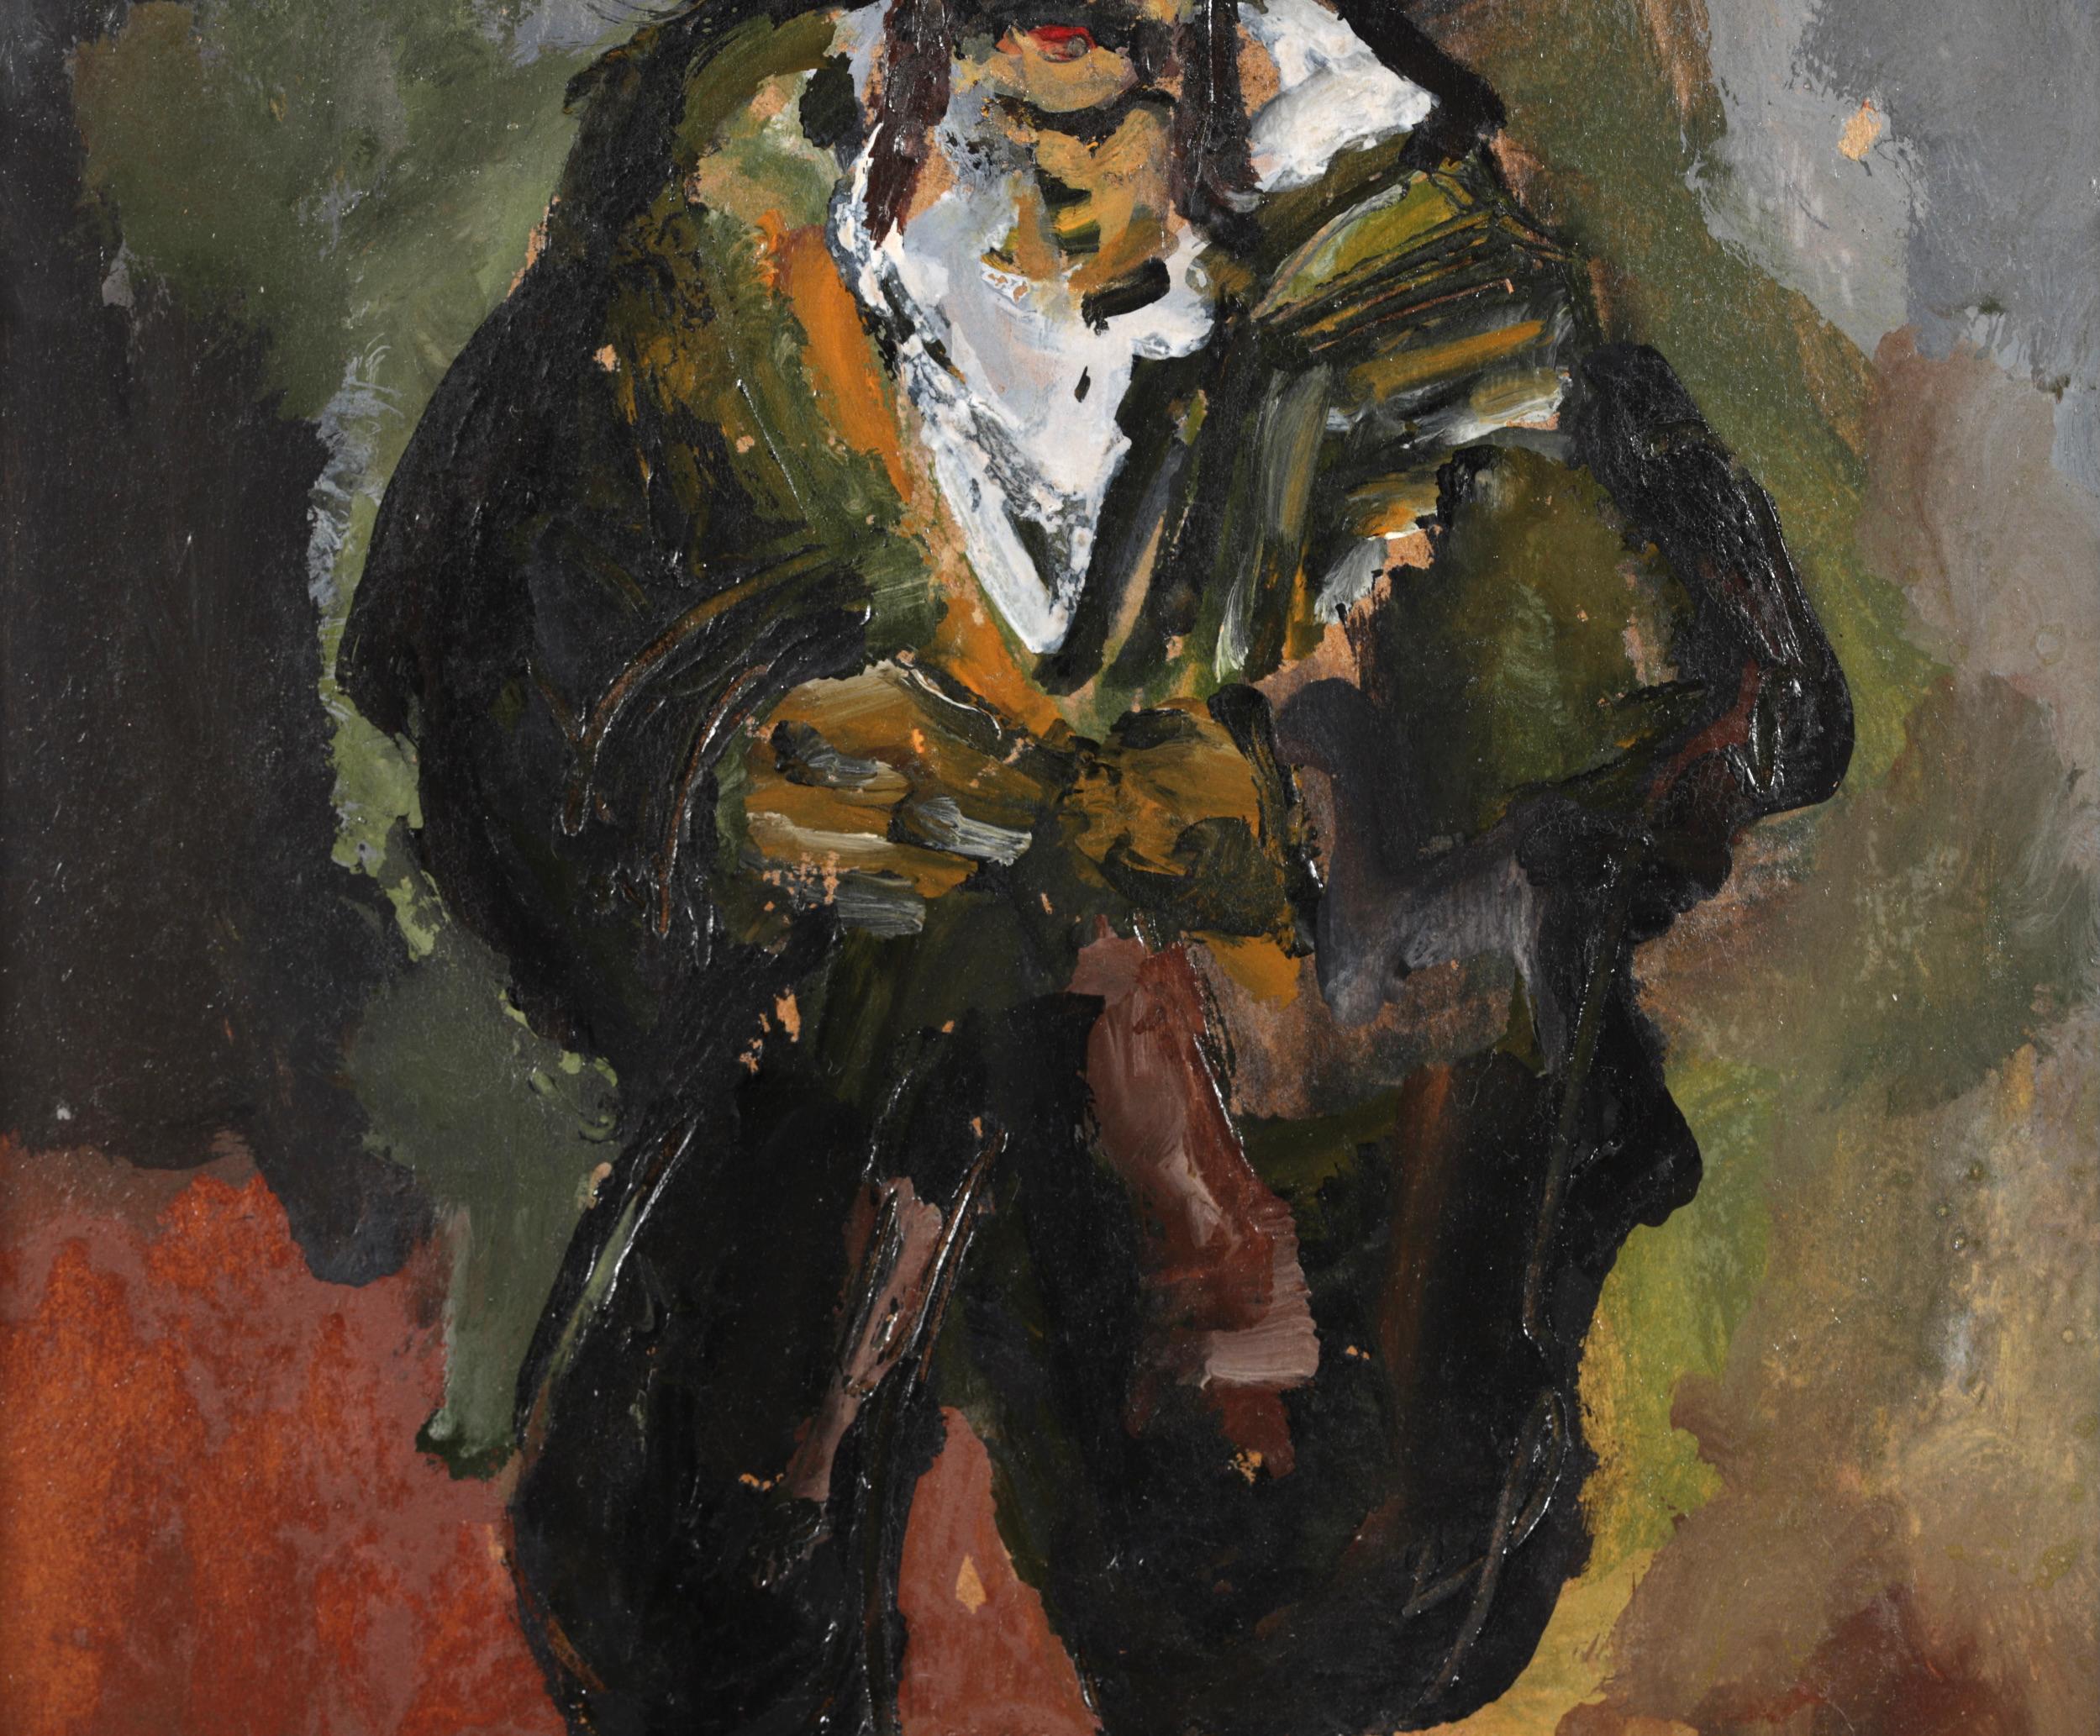 Signed oil on board expressionist portrait circa 1930 by French painter Mane-Katz. The piece depicts an Hasidic Jew which is a subject he is best know for.

Signature:
Signed lower right

Dimensions:
Framed: 16.5